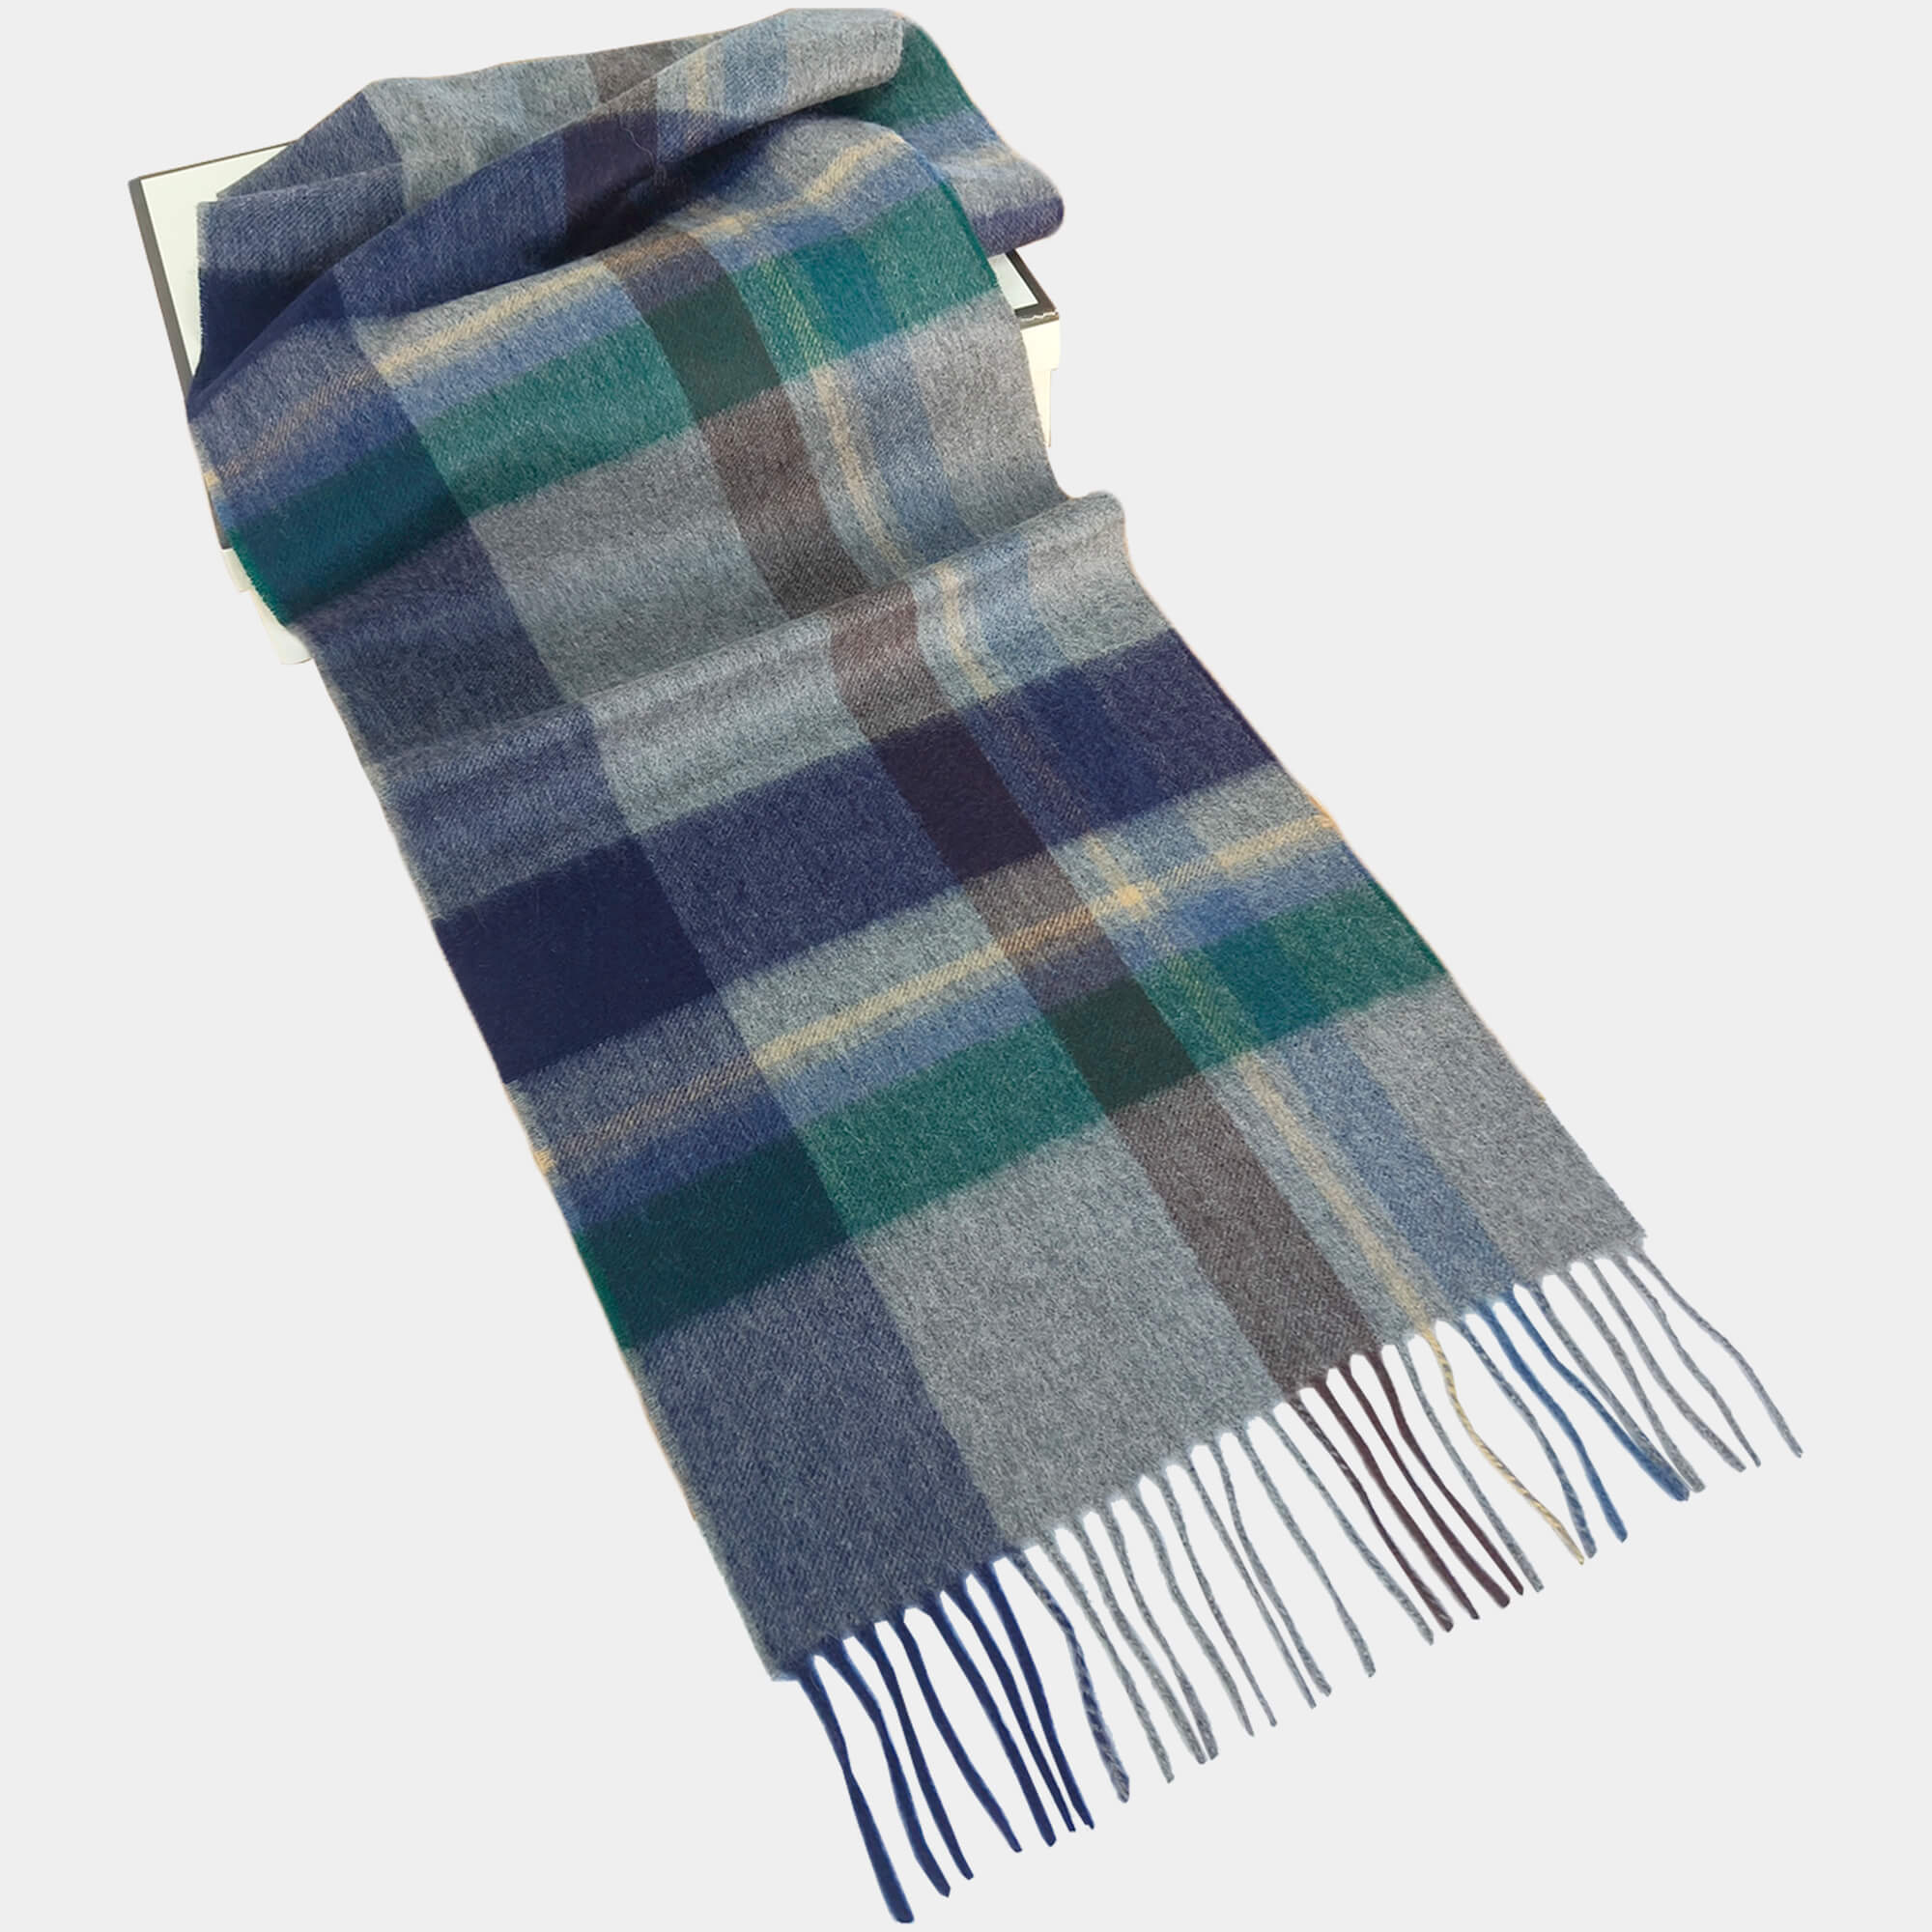 Wool and Cashmere Scarf Green Tartan